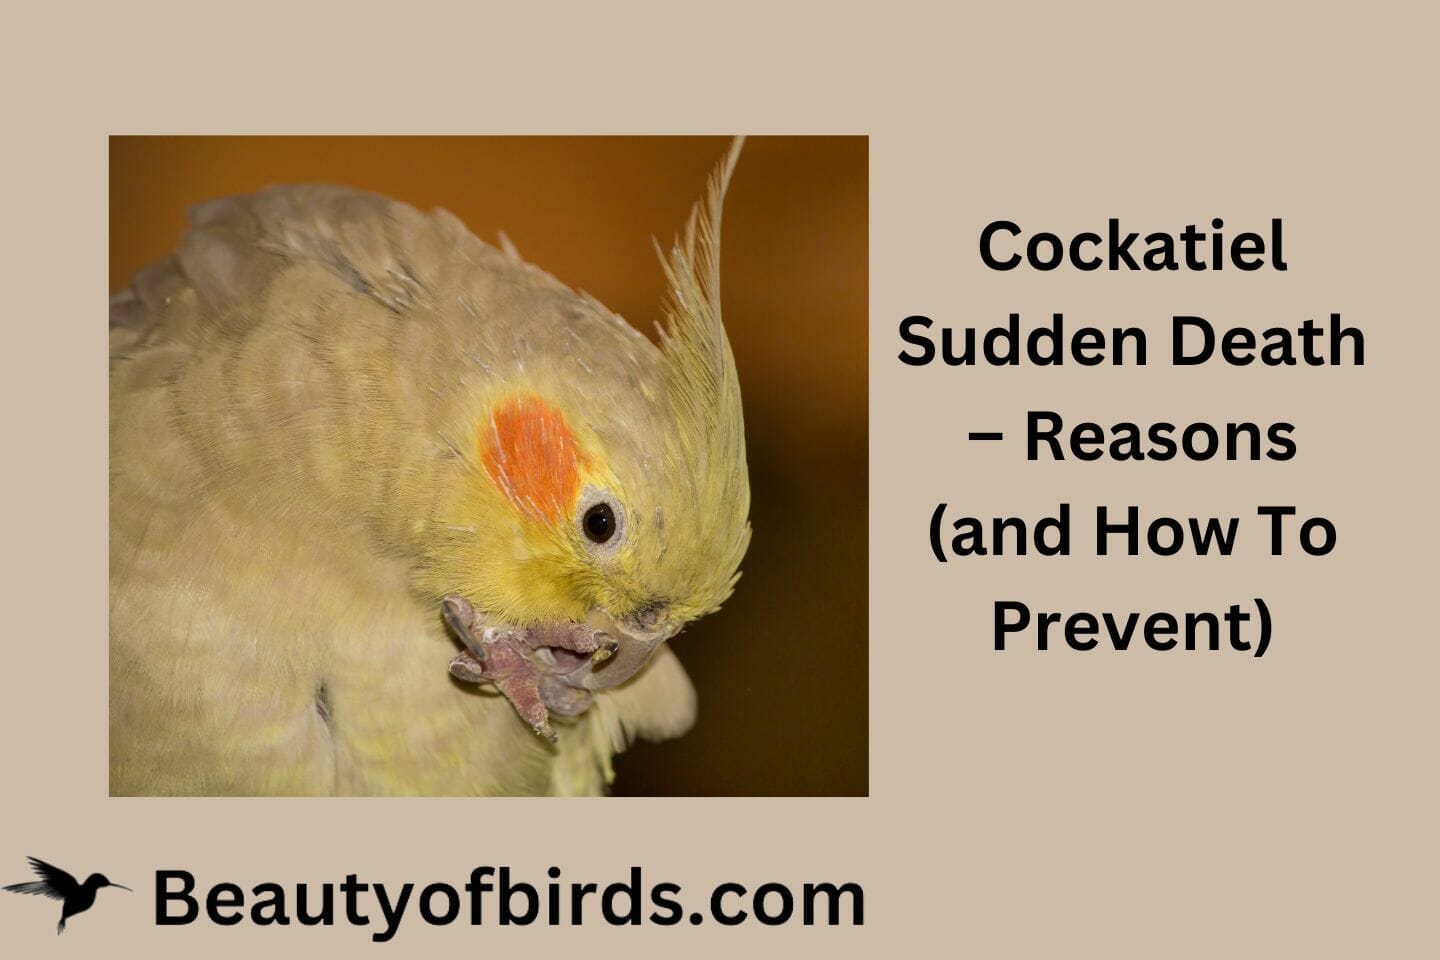 Cockatiel Sudden Death – Reasons (and How To Prevent)